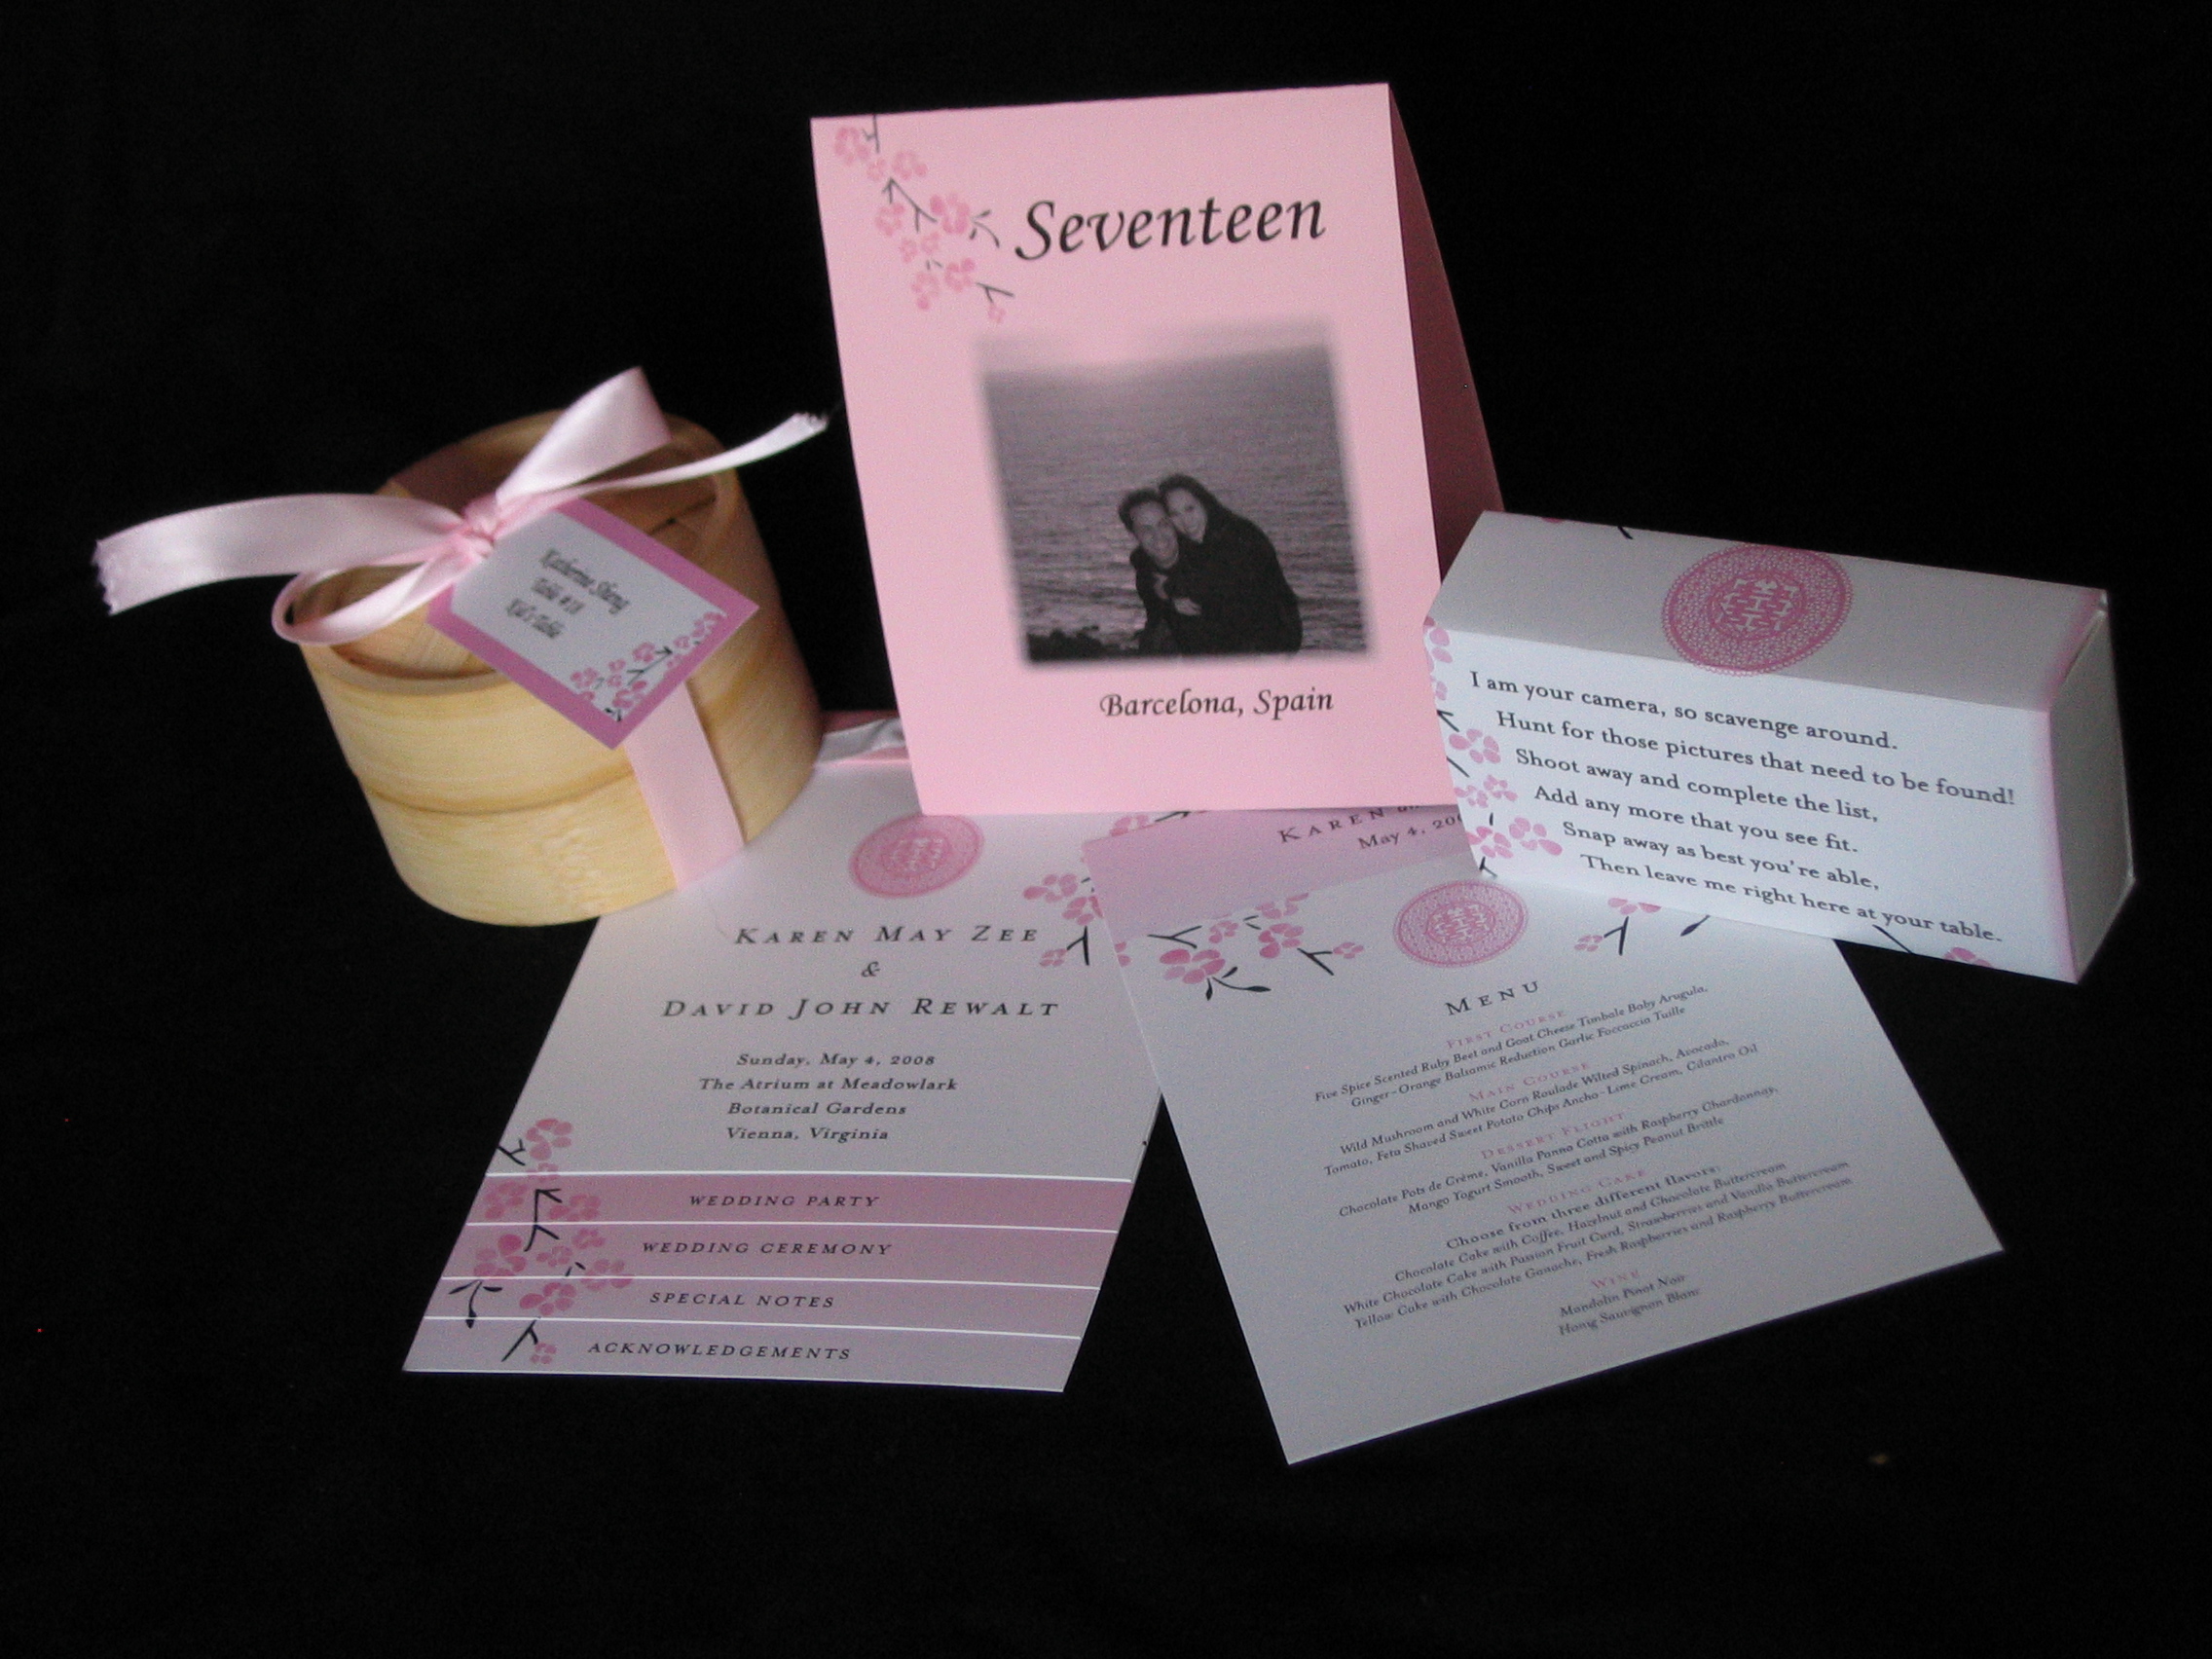 mini bamboo steamers with chocolate covered fortune cookie; pink cherry blossom and double happiness on menu cards, ceremony programs, disposable camera, table marker